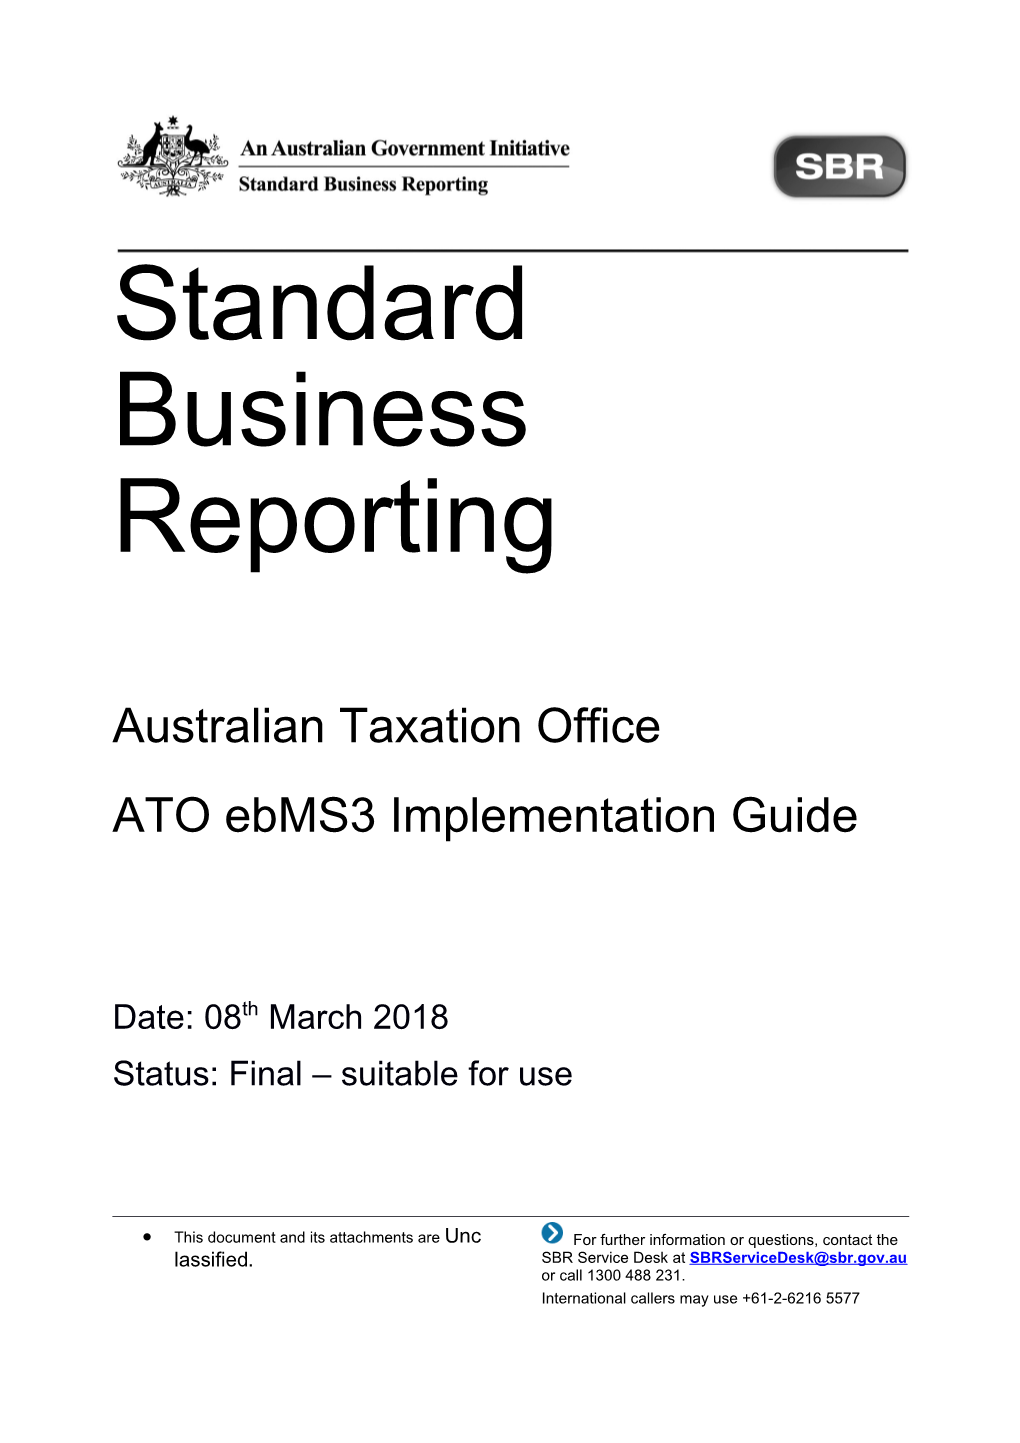 ATO Ebms3 Implementation Guide